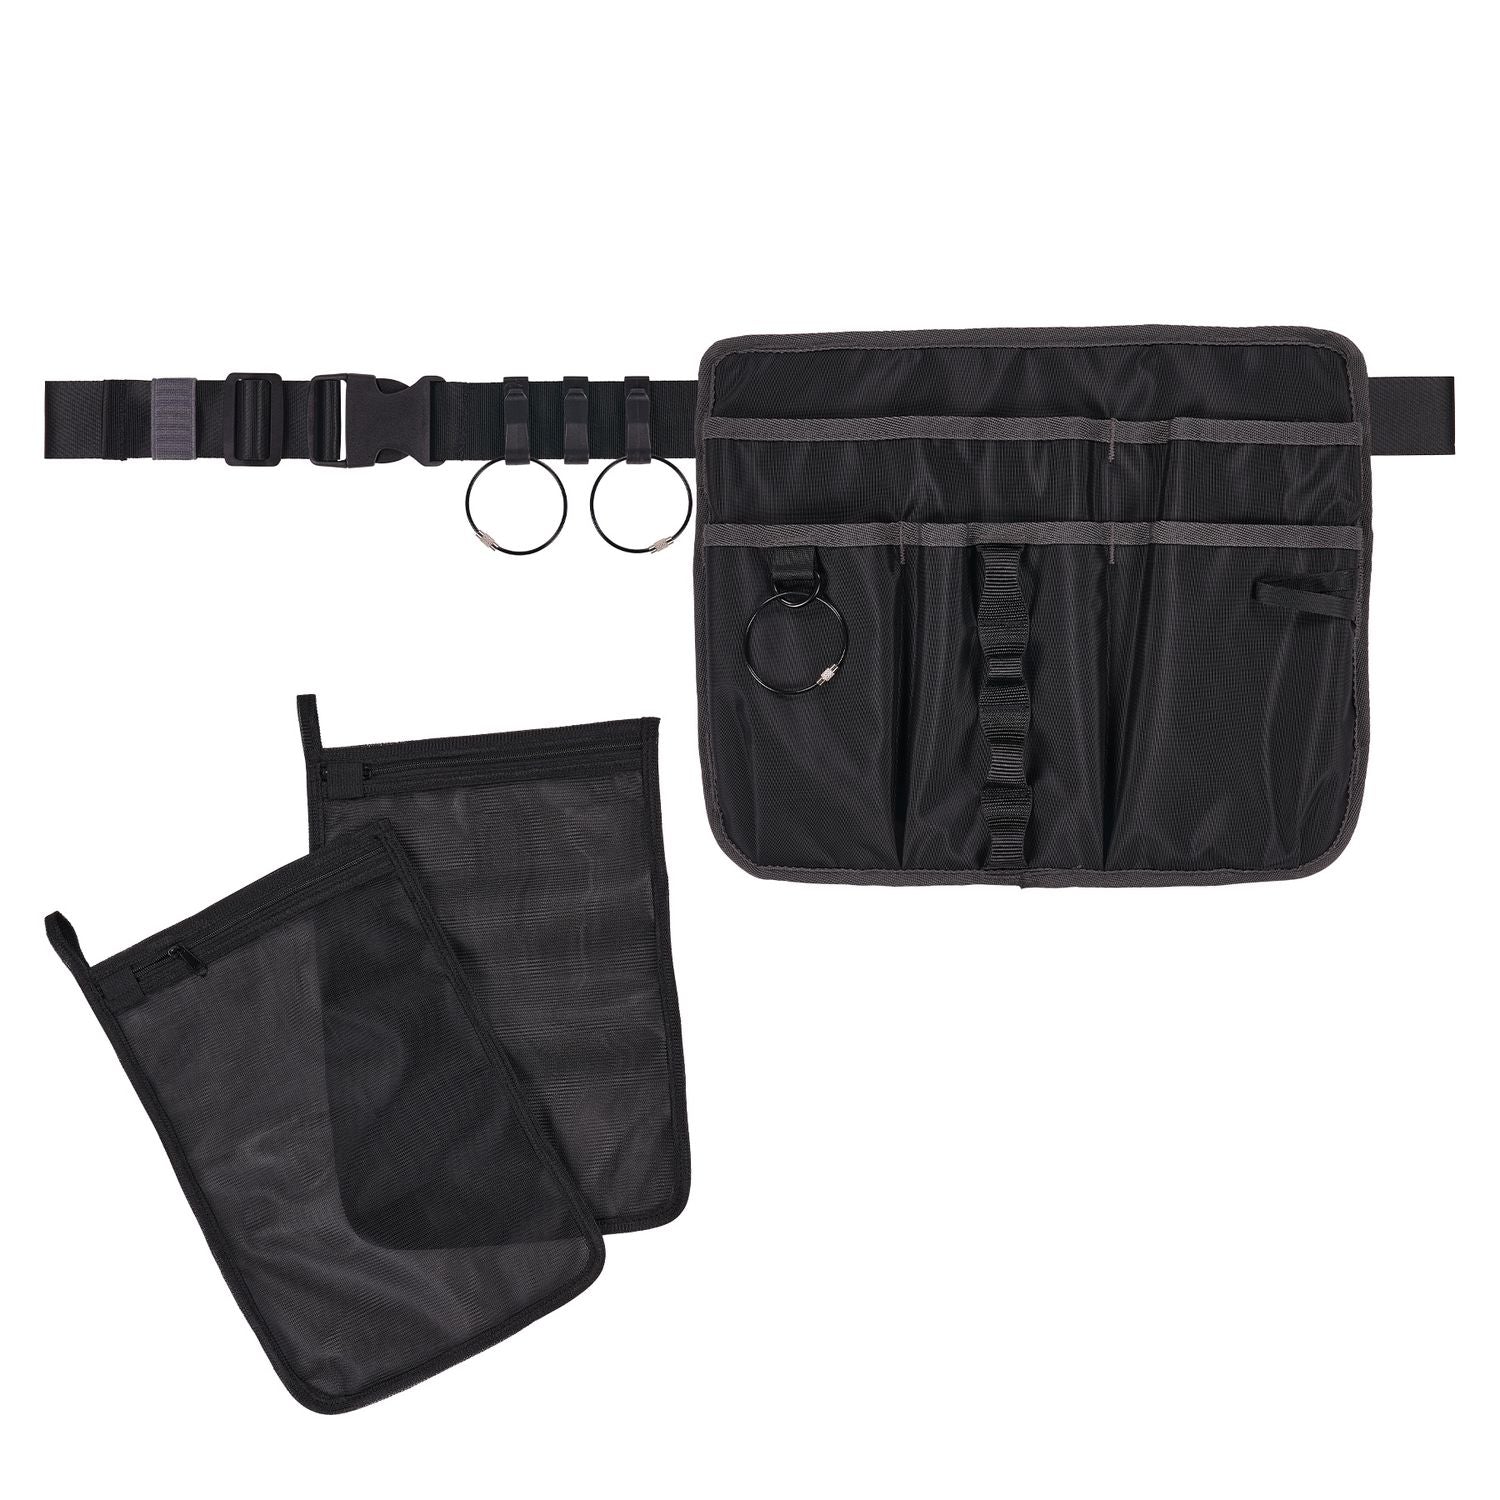 arsenal-5715-cleaning-apron-pouch-with-pockets-10-compartments-11-x-135-nylon-black-ships-in-1-3-business-days_ego13718 - 1